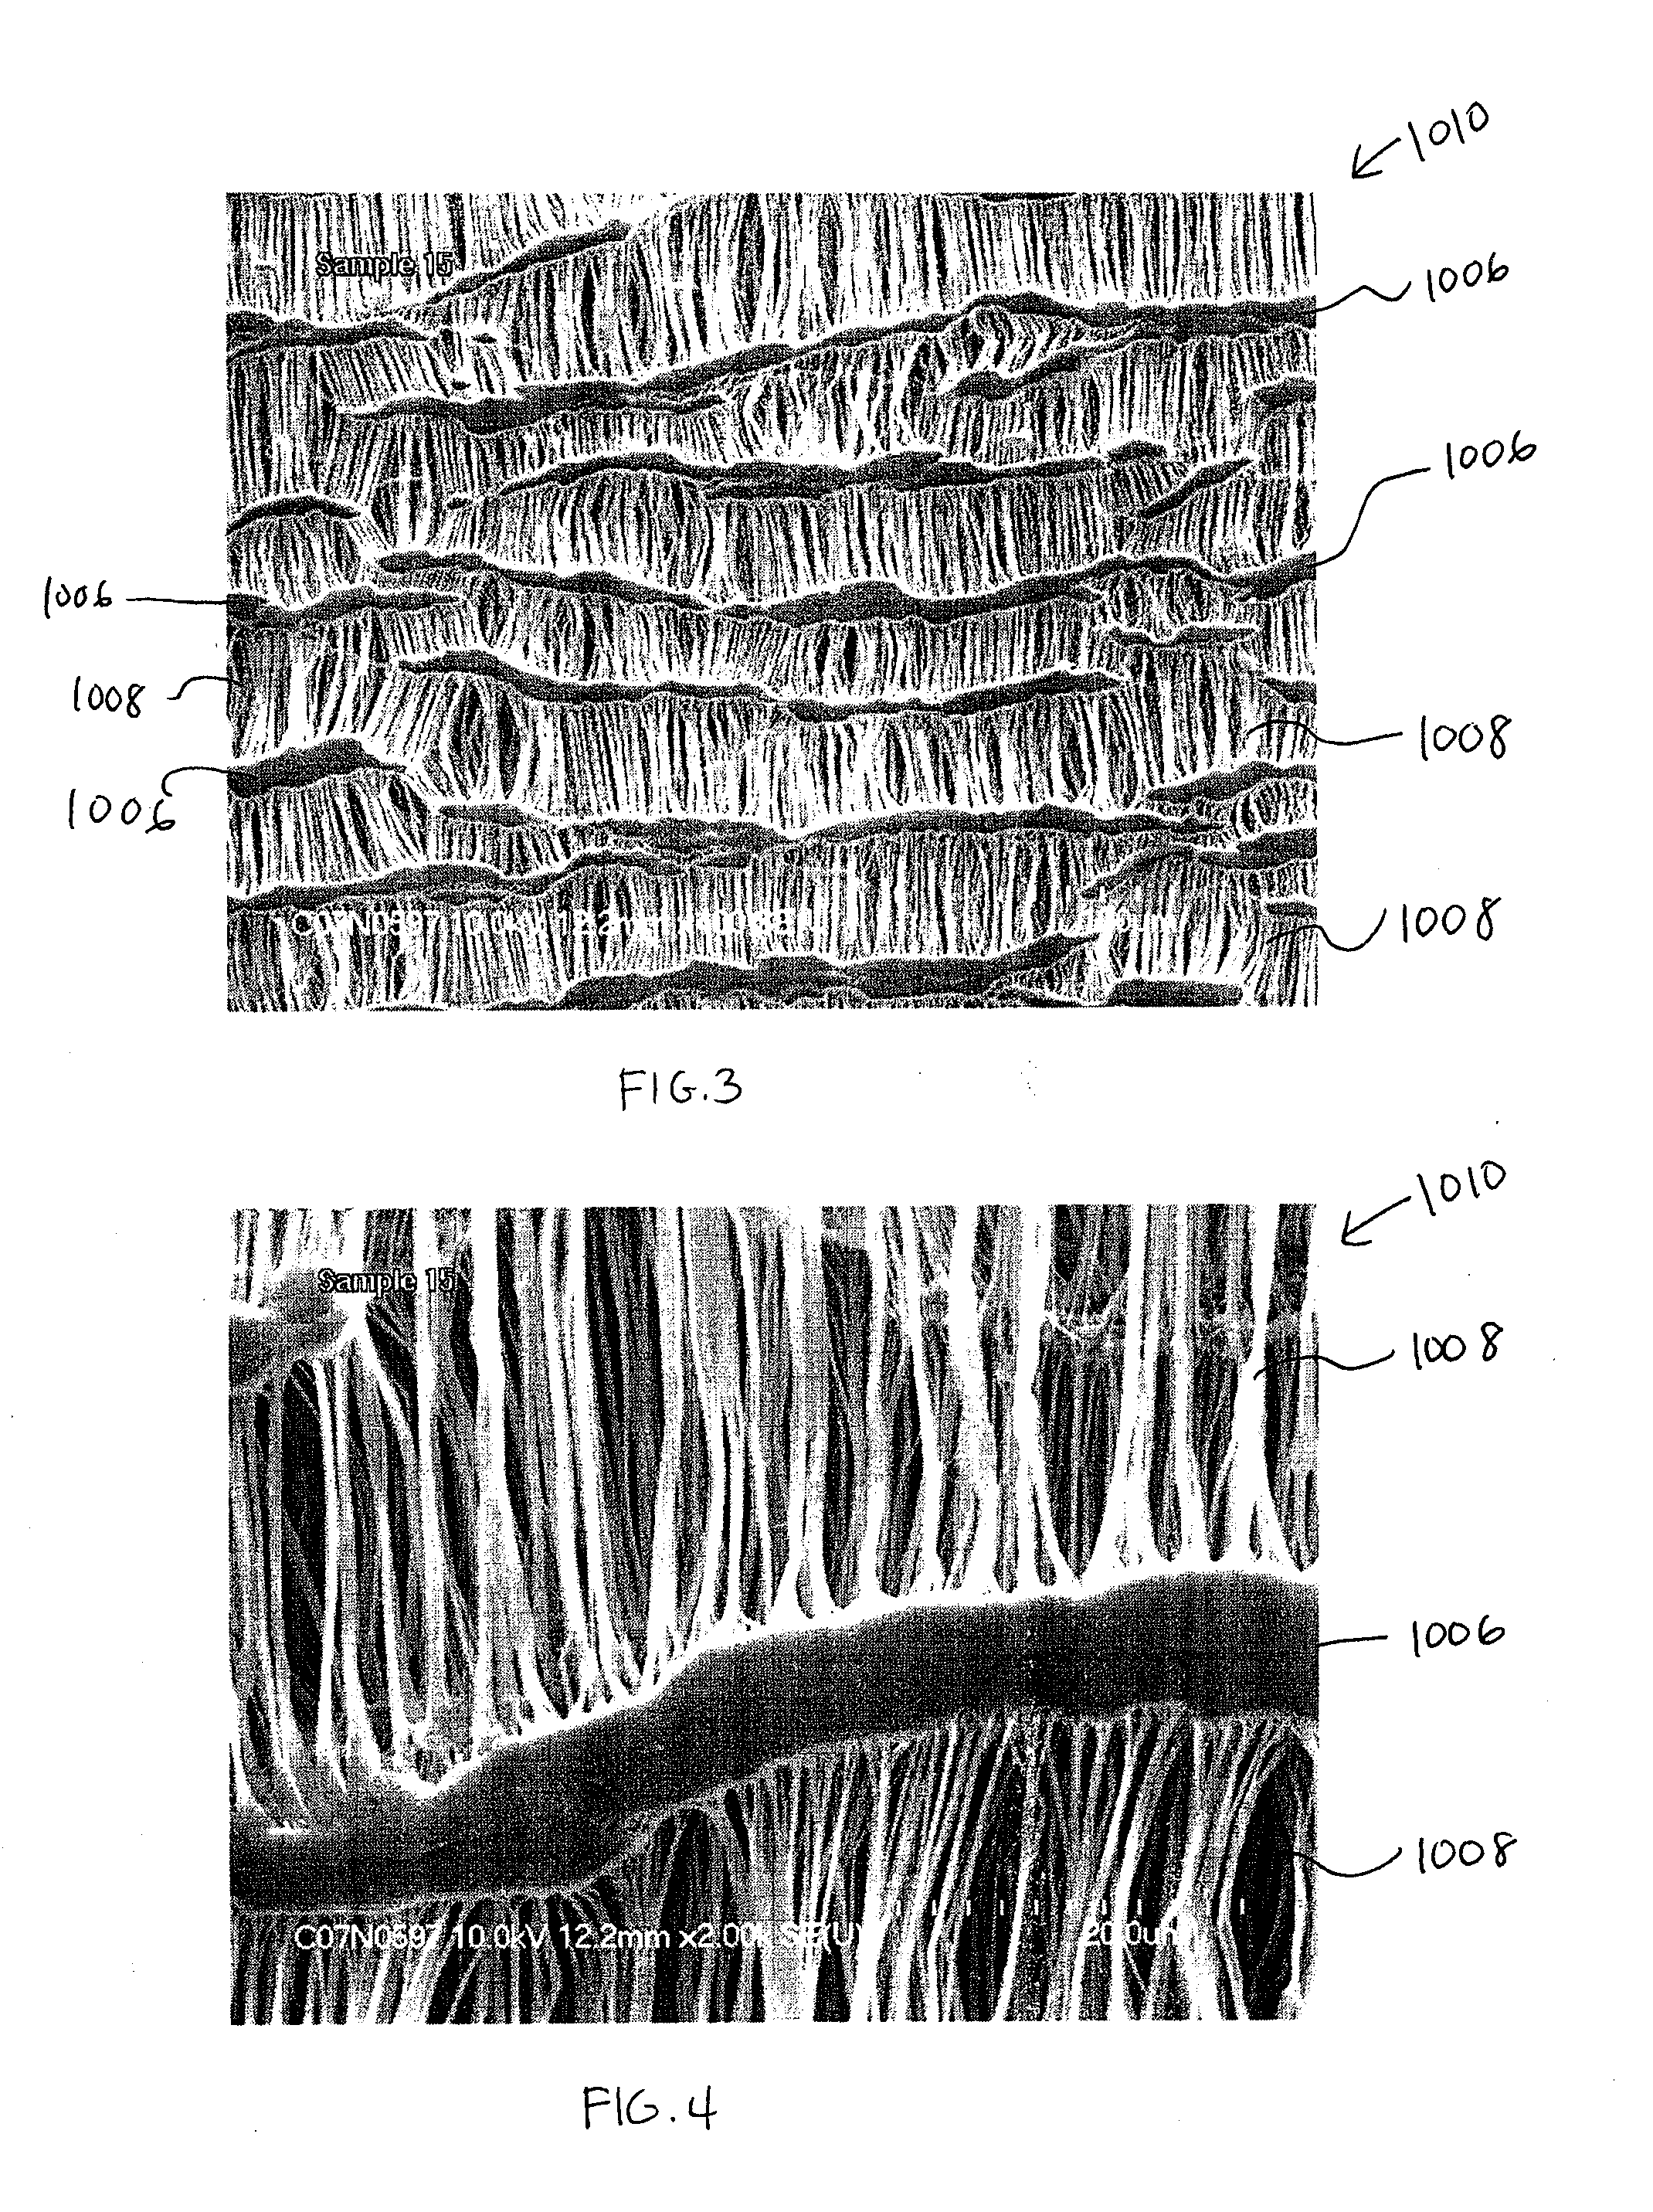 Porous implant with effective extensibility and methods of forming an implant